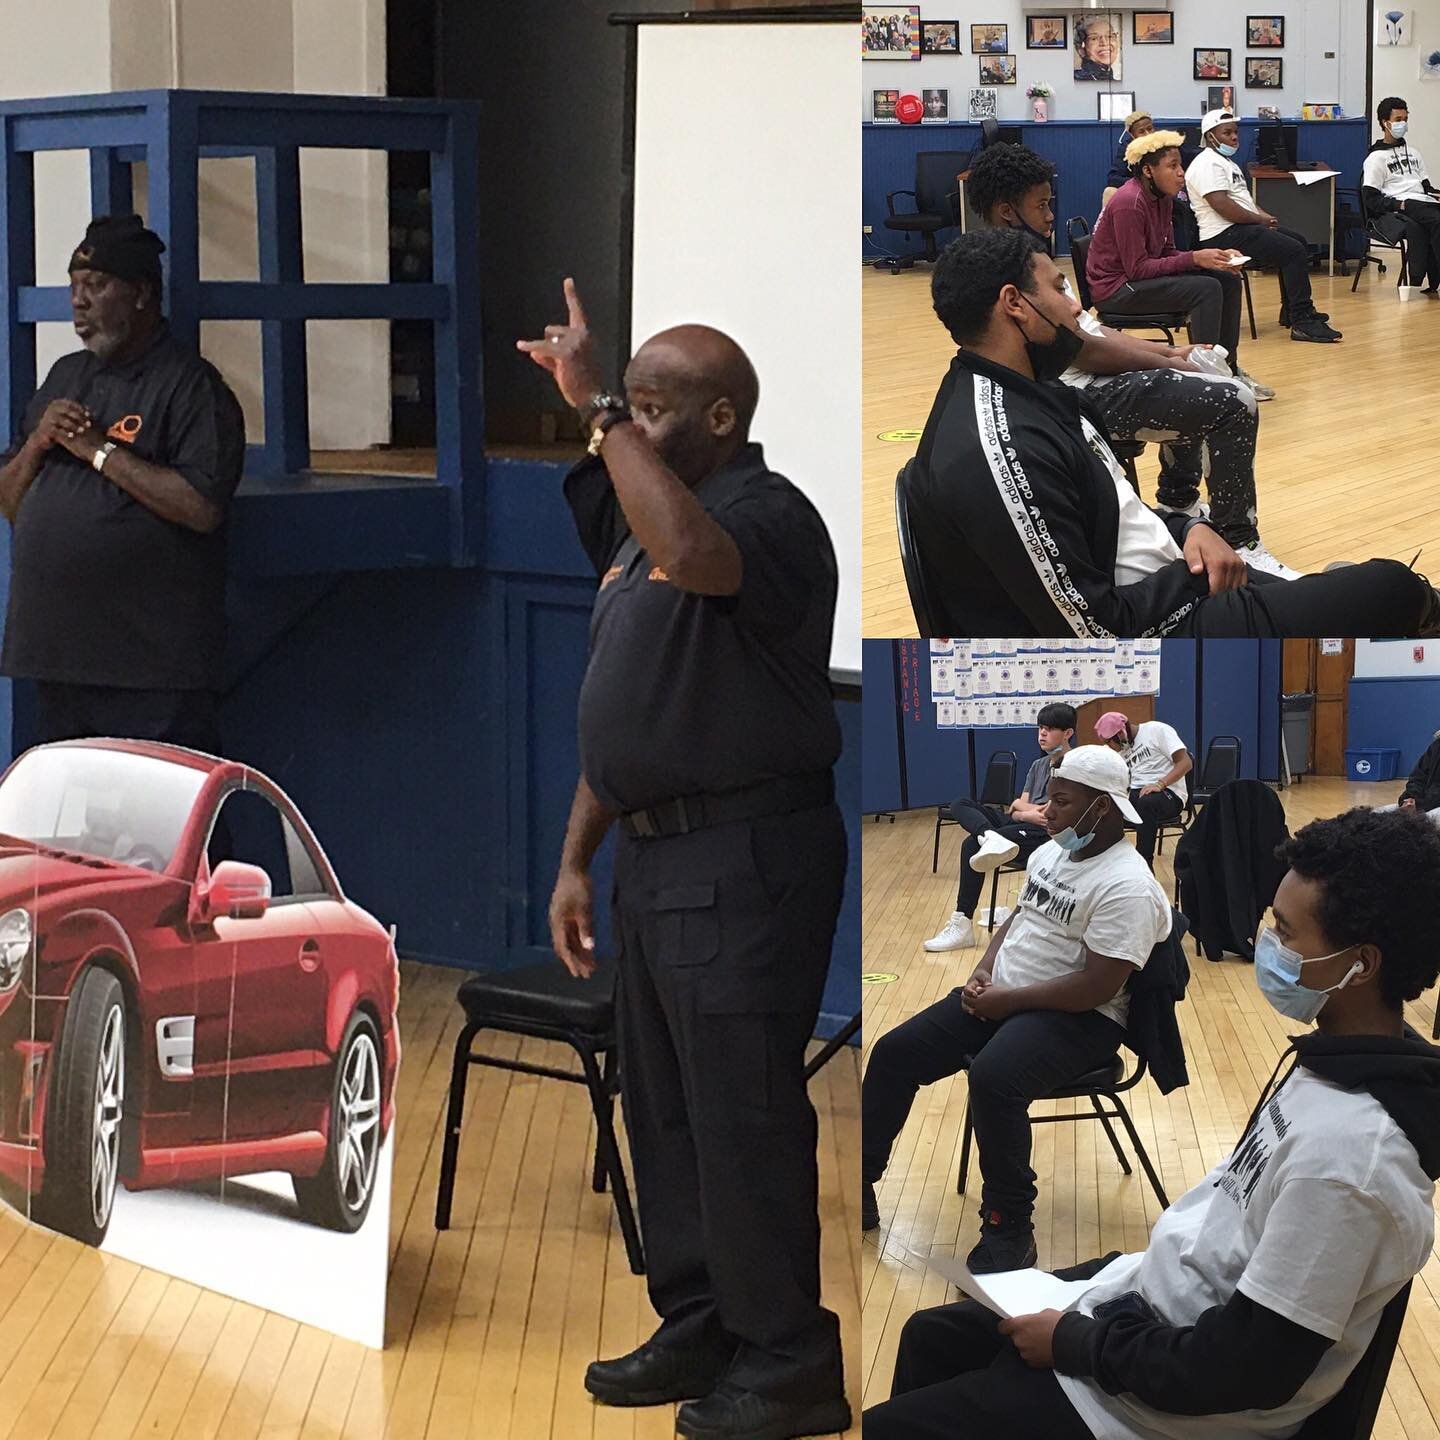 &ldquo;The Talk&rdquo; every minority boys gets! What to do when stopped by police! LEVERAGE, Derek Wright &amp; Vincent Beckles. #bdasinc #BlackDiamondsAcademicSuccess #MBKSupportStartsHere